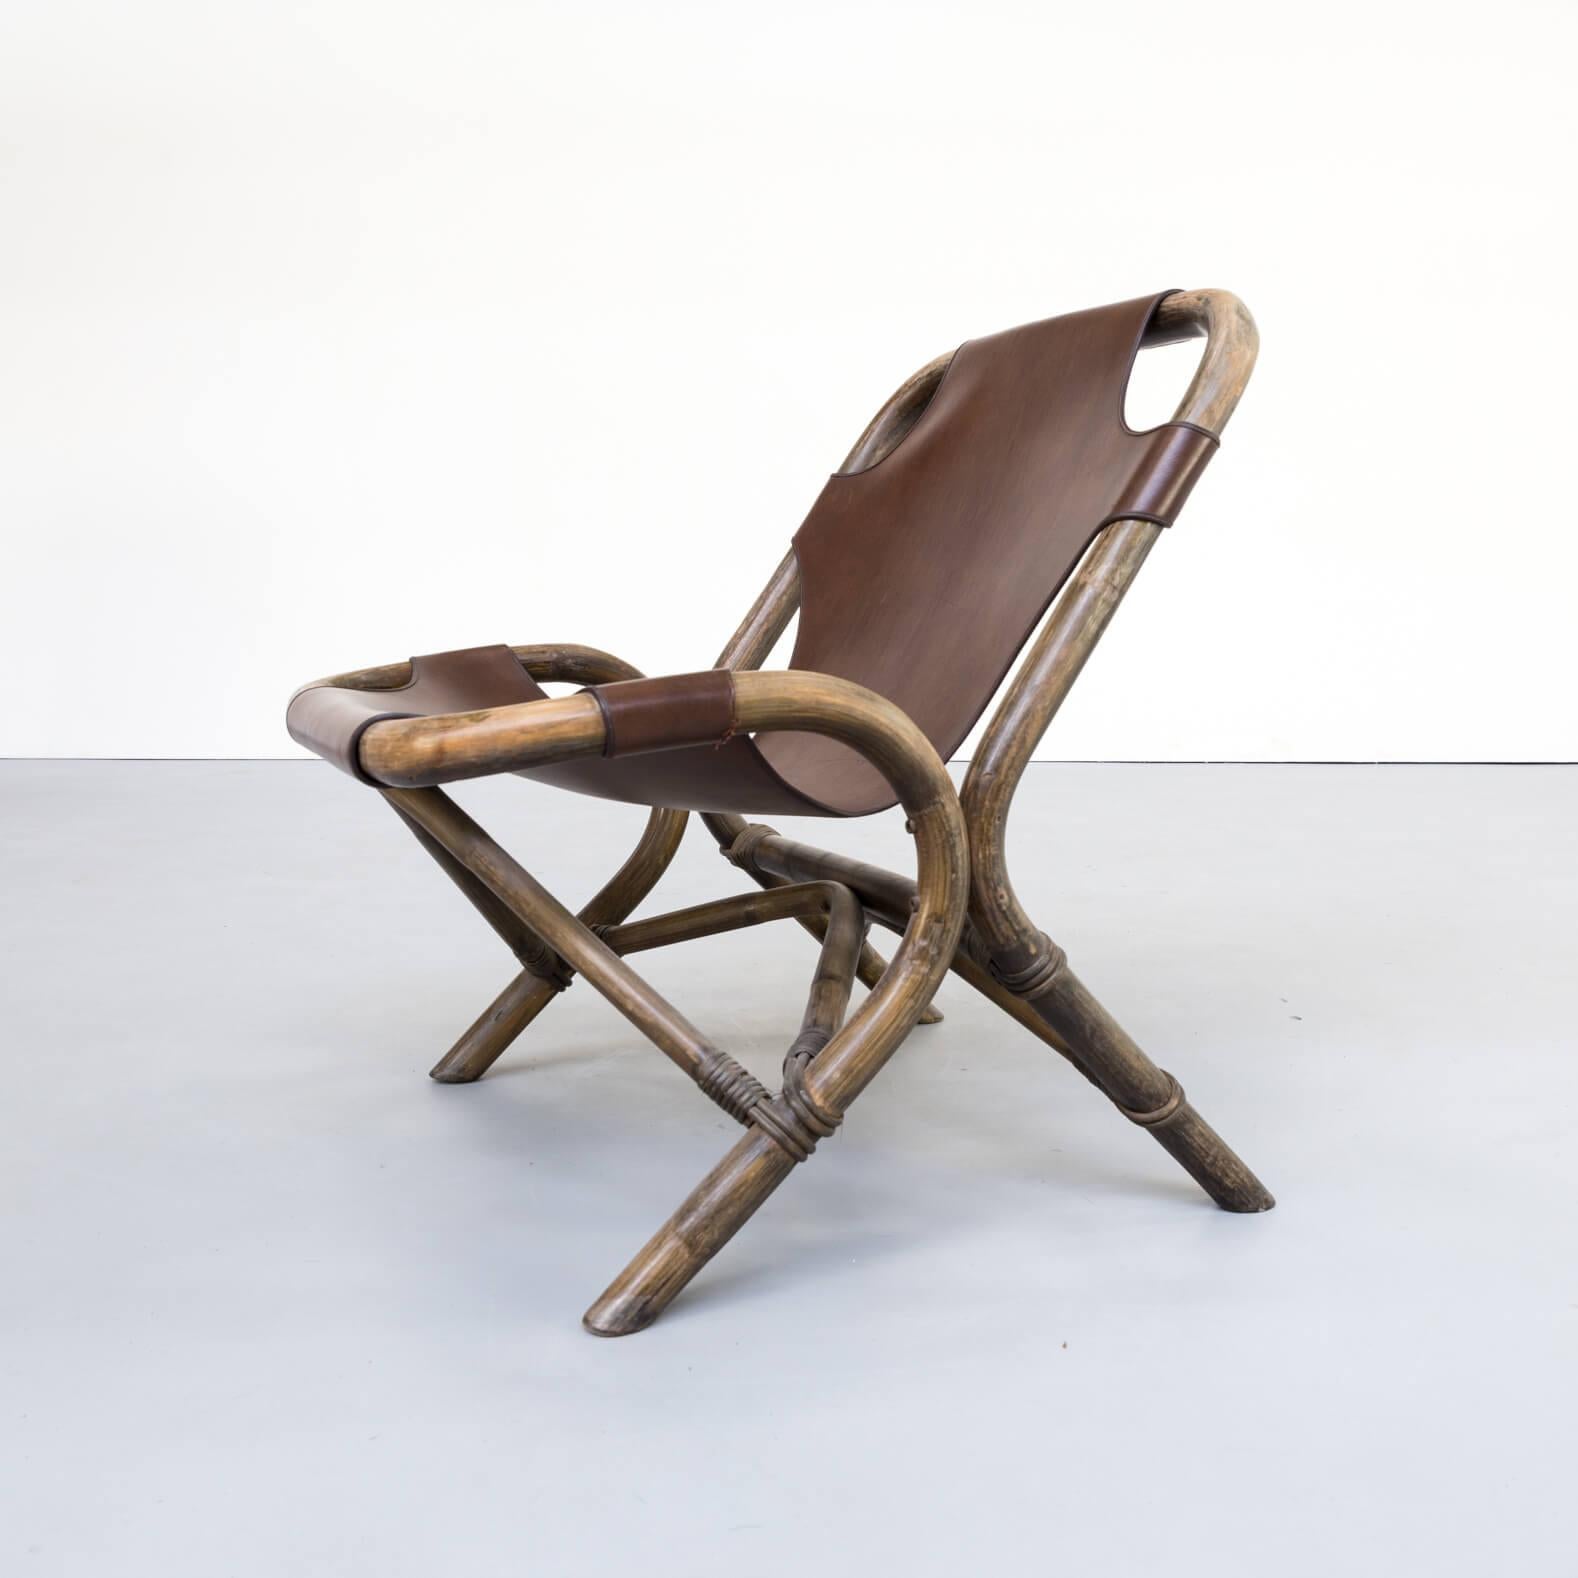 1980s Skai Leather Lounge Chairs, Bamboo Frame For Sale 4